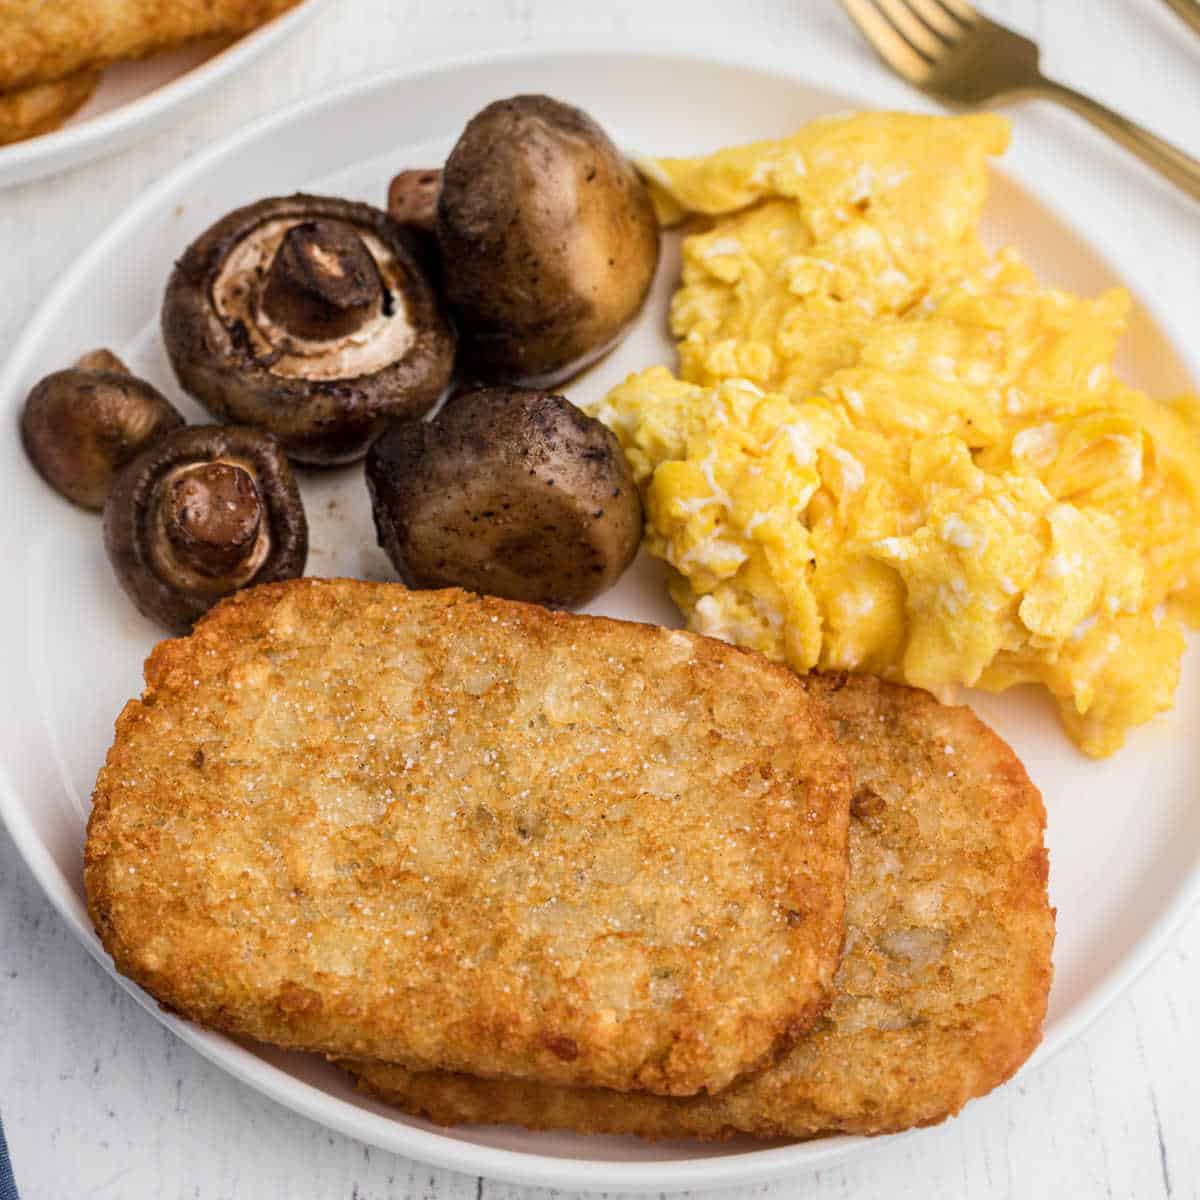 plate with 2 hash brown patties on it, with scrambled eggs and mushrooms in the back